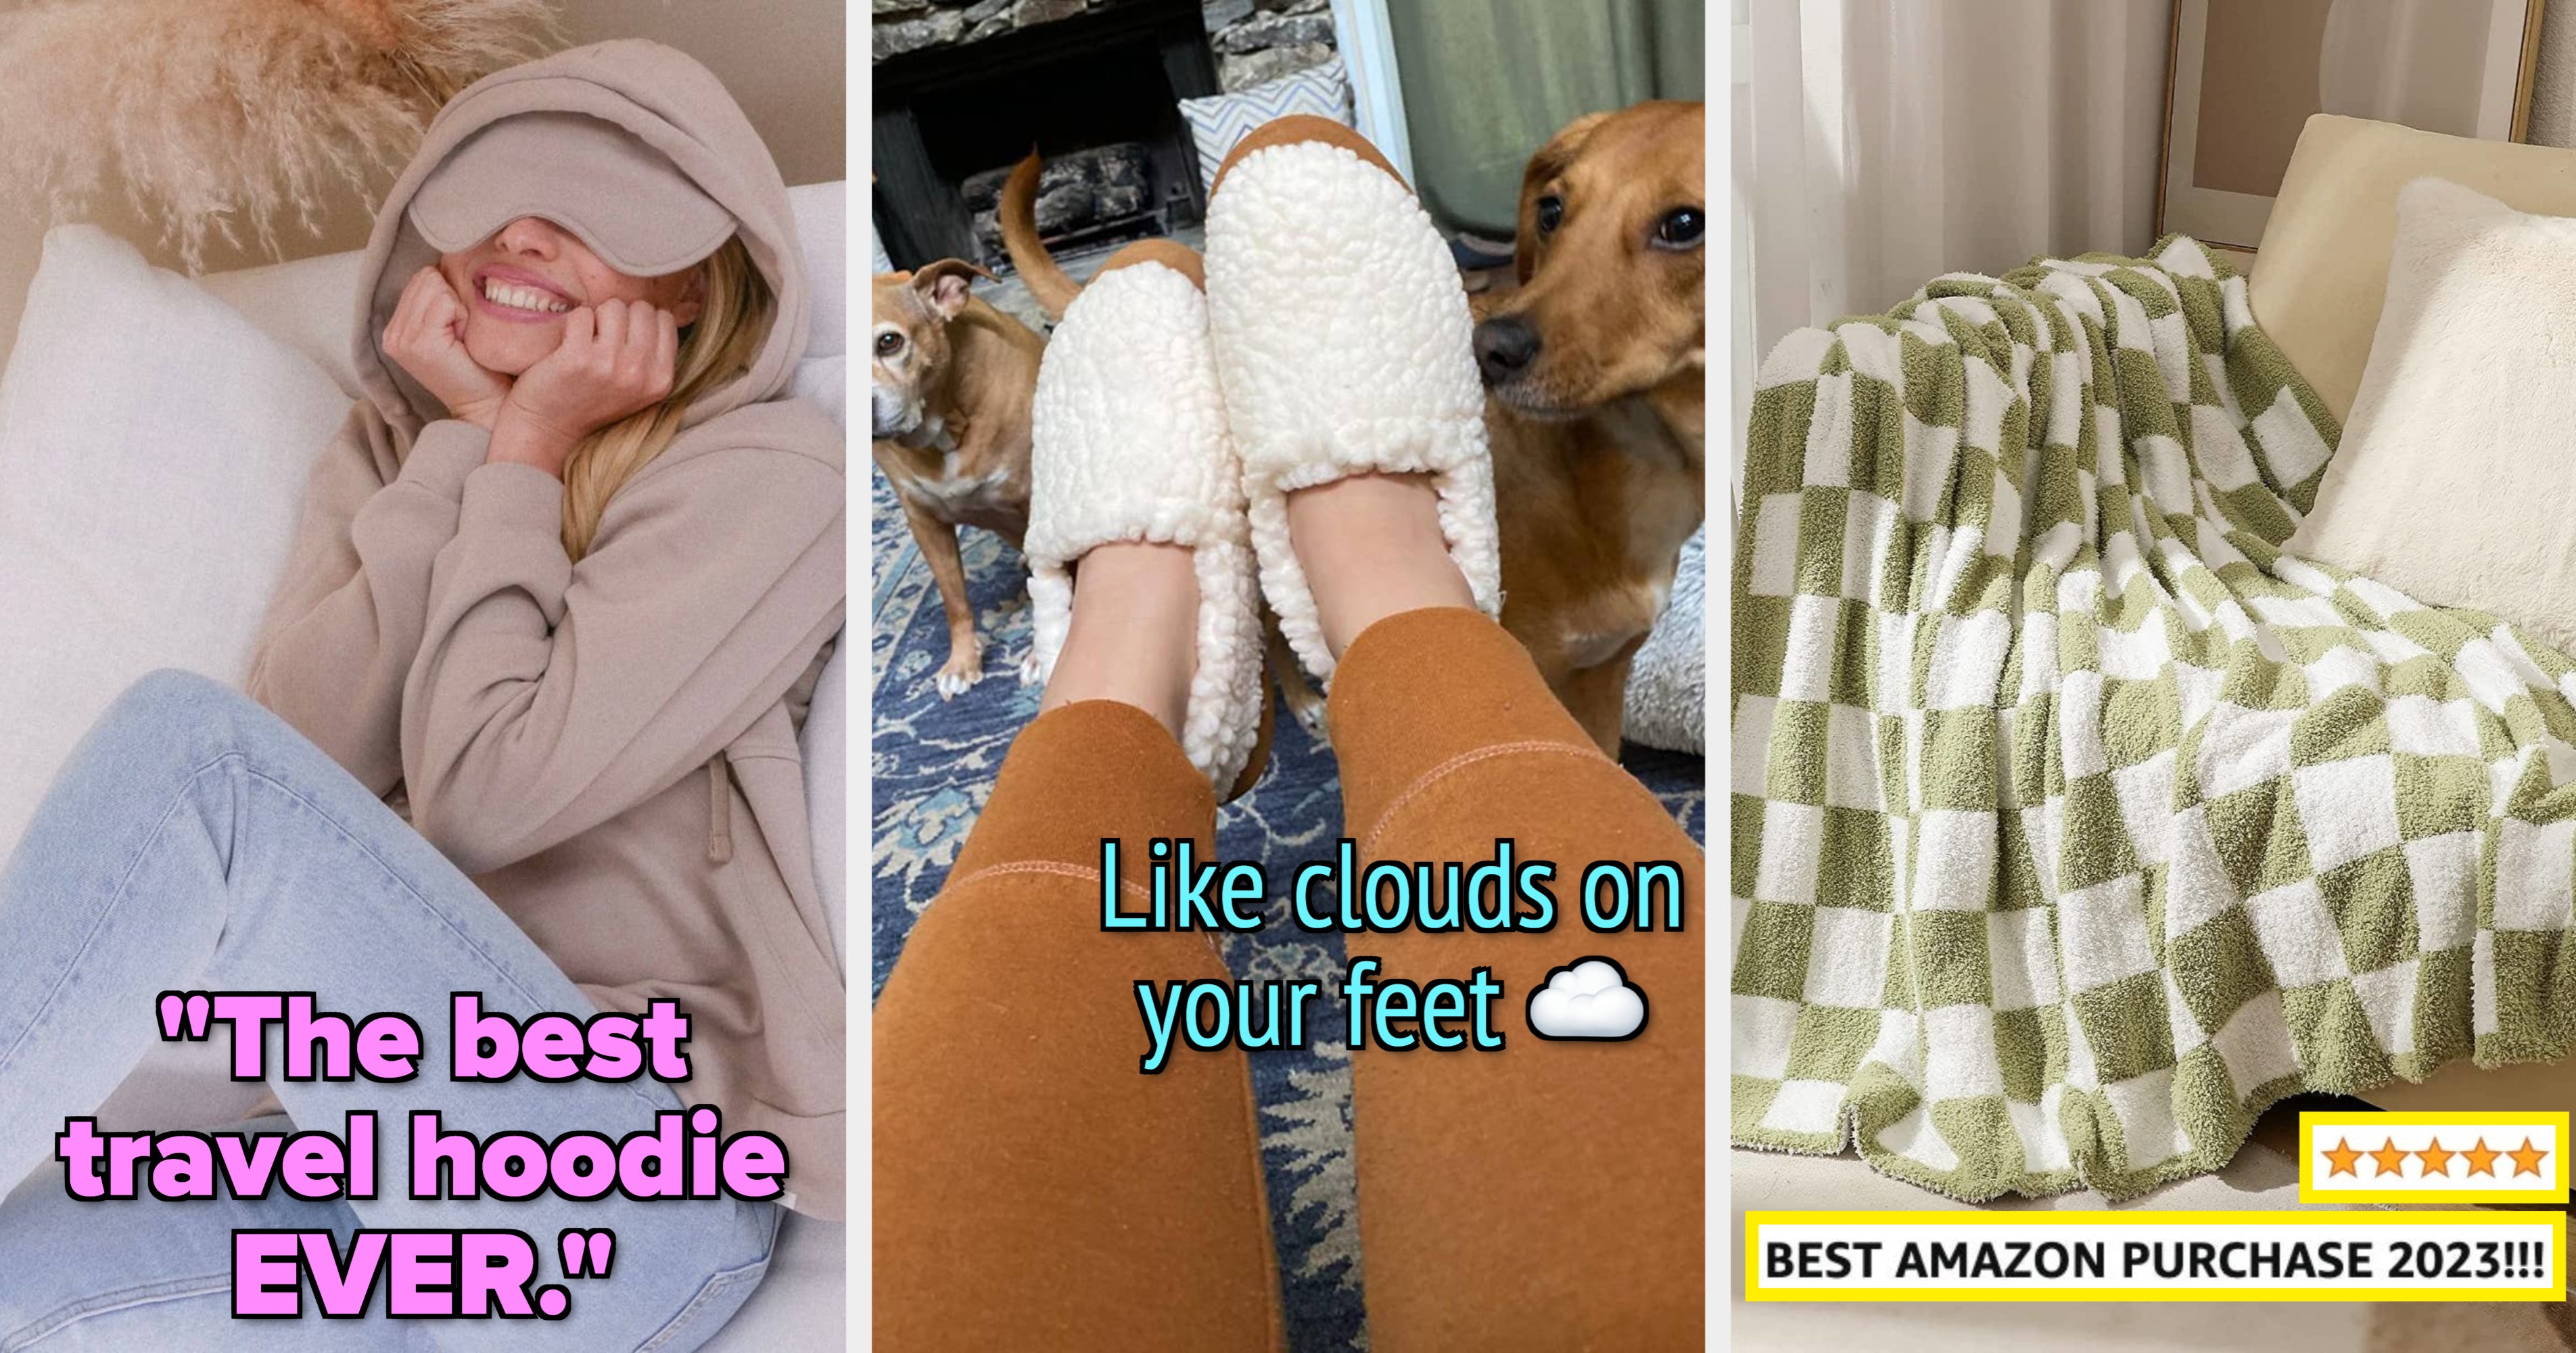 46 Products If All You Want For Christmas Is Comfort